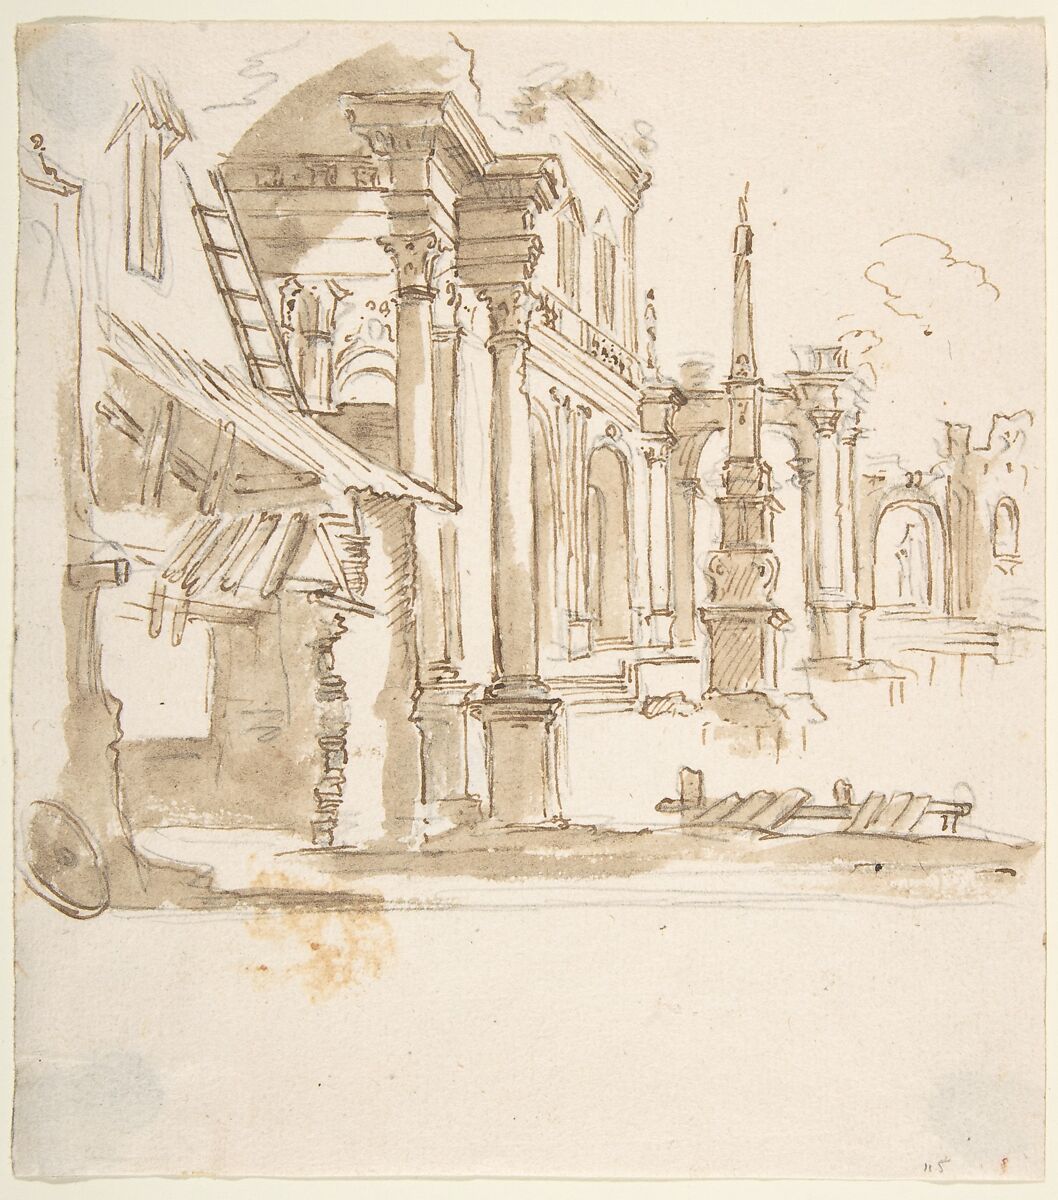 Capriccio with Architectural Ruins in Perspective, Anonymous, Italian, Piedmontese, 18th century, Pen and brown ink, brush and brown wash, over leadpoint or graphite 